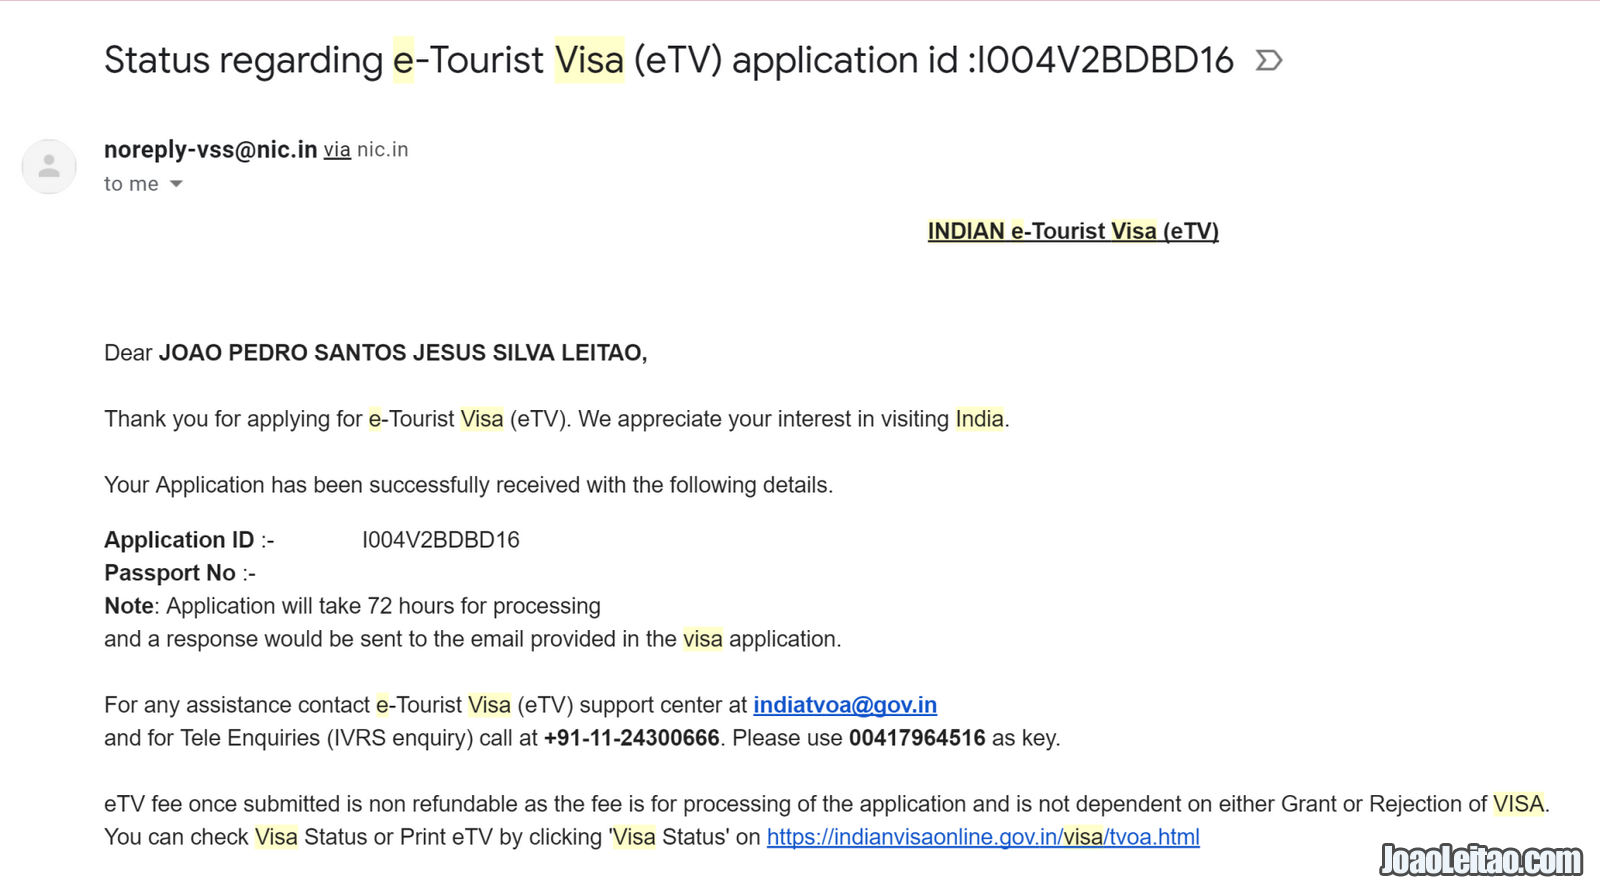 CONFIRMATION COMPLETING THE INDIA VISA APPLICATION